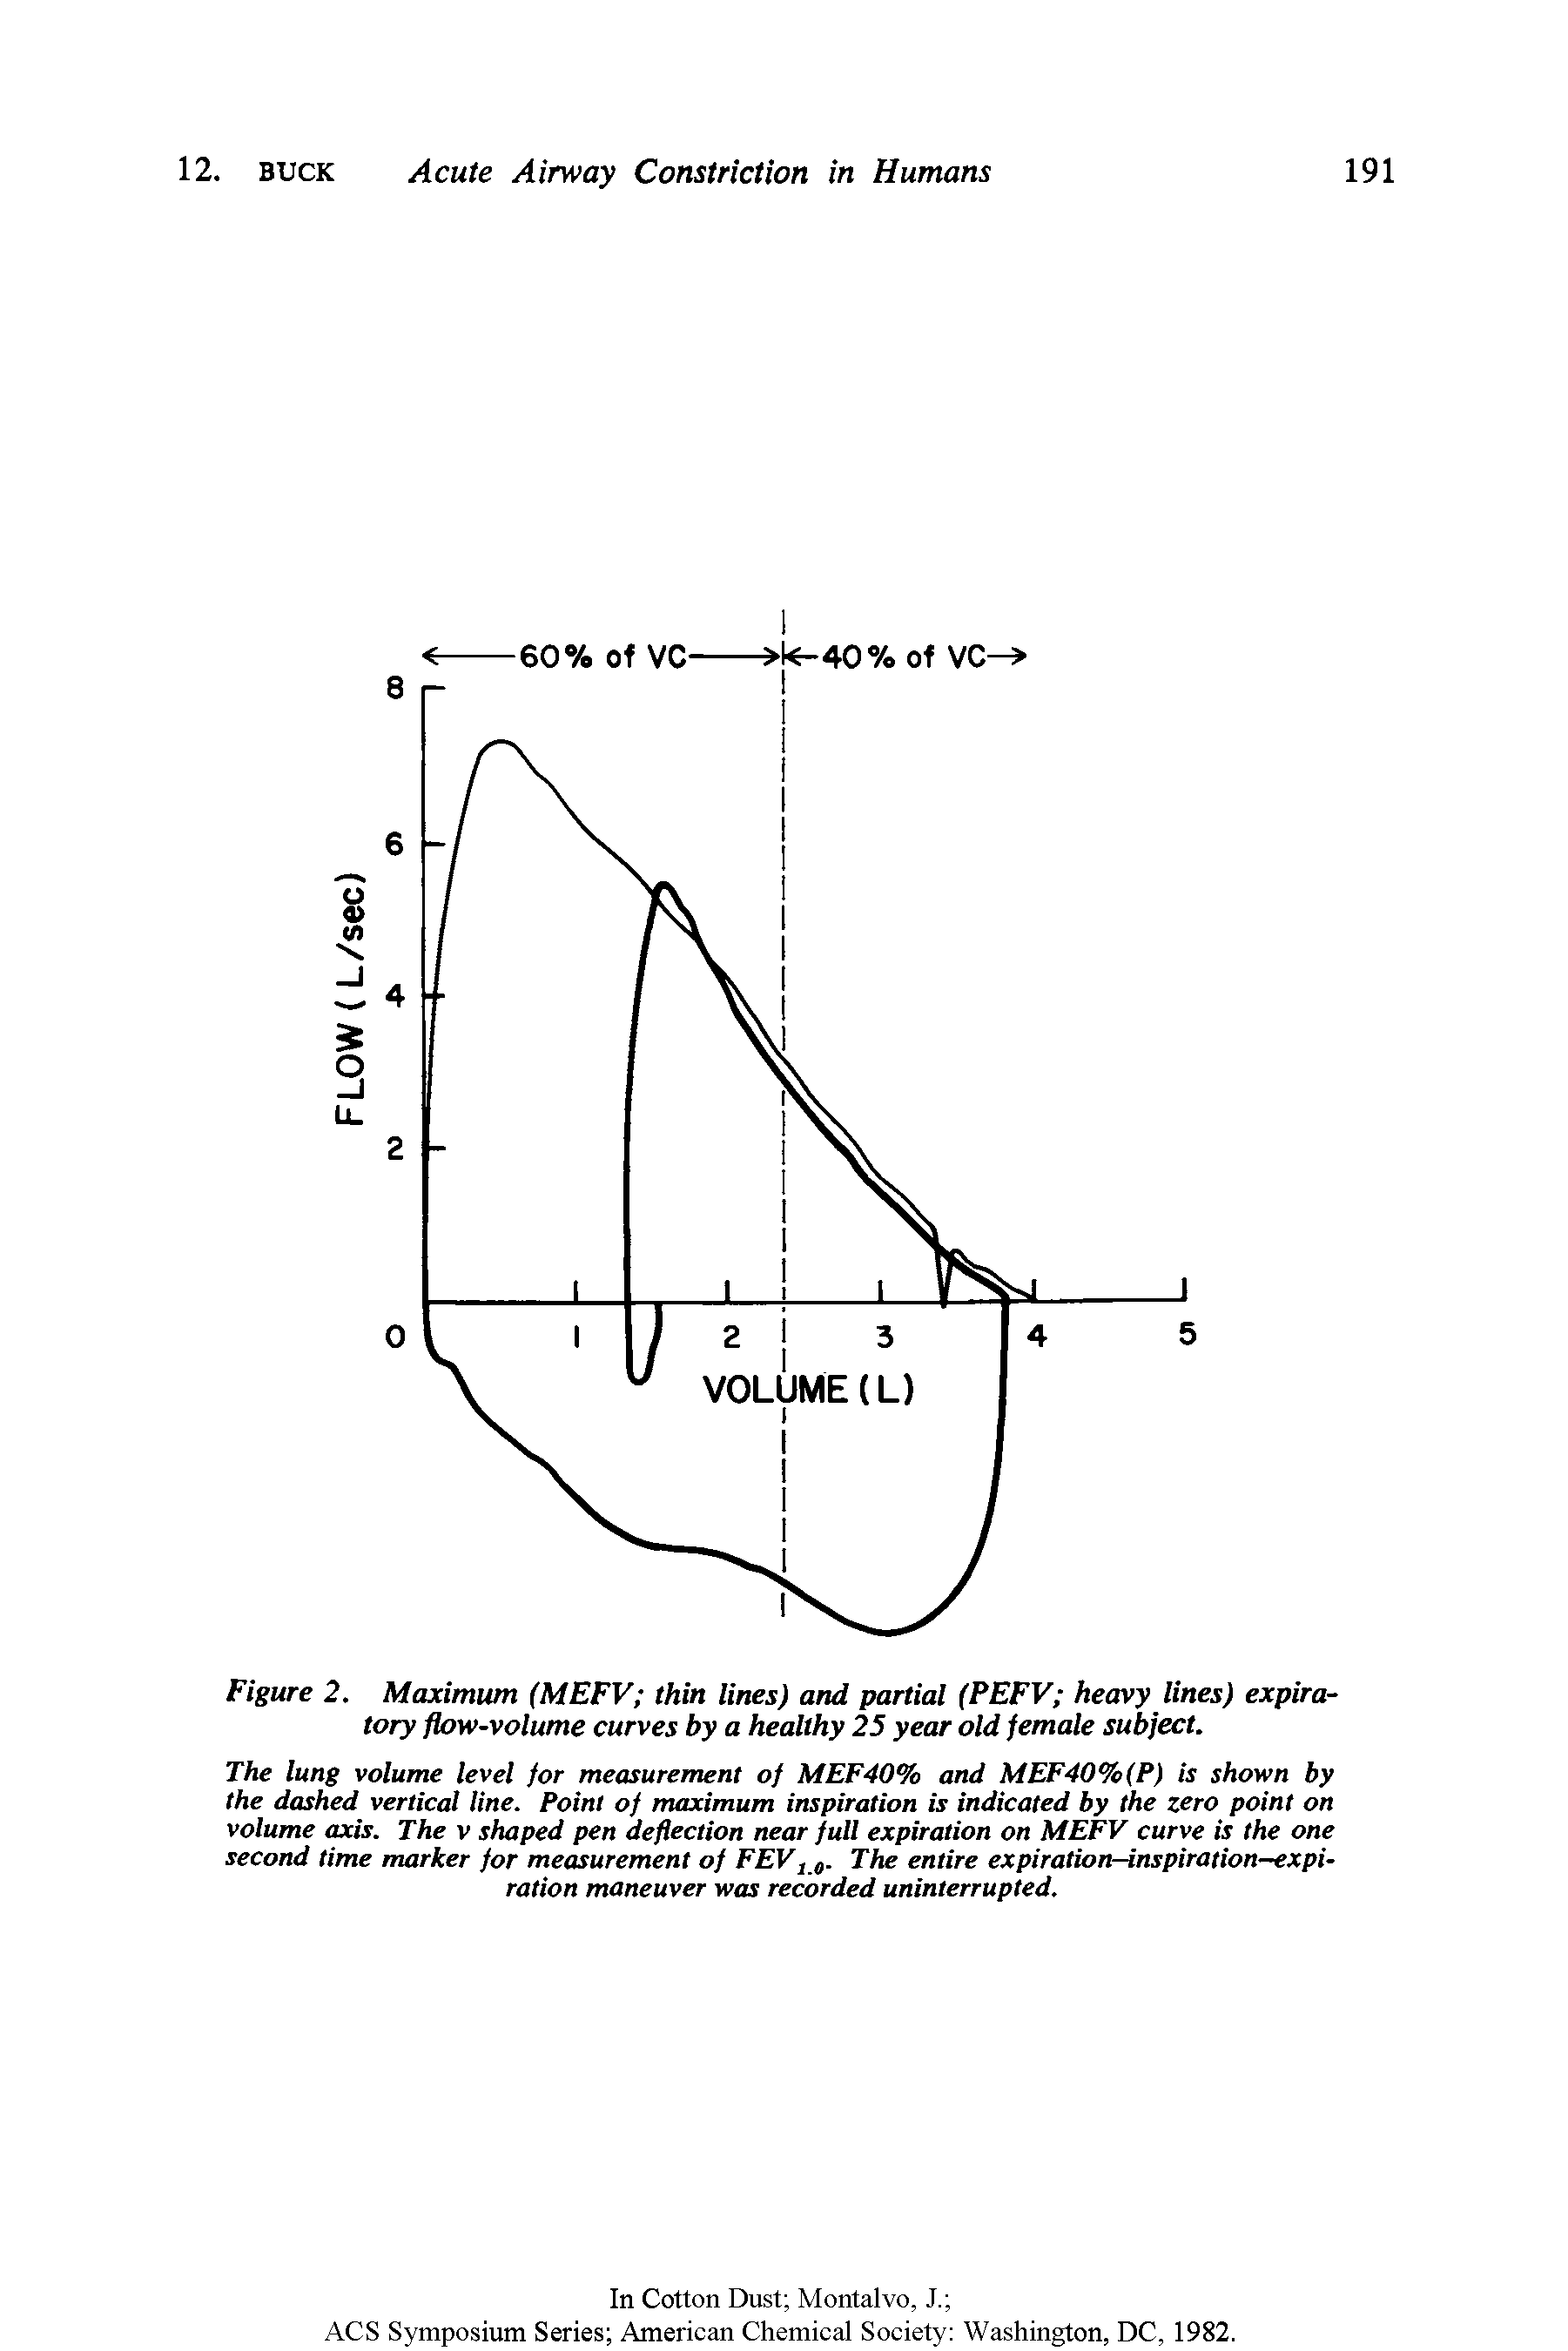 Figure 2. Maximum (MEFV thin lines) and partial (PEFV heavy lines) expiratory flow-volume curves by a healthy 25 year old female subject.